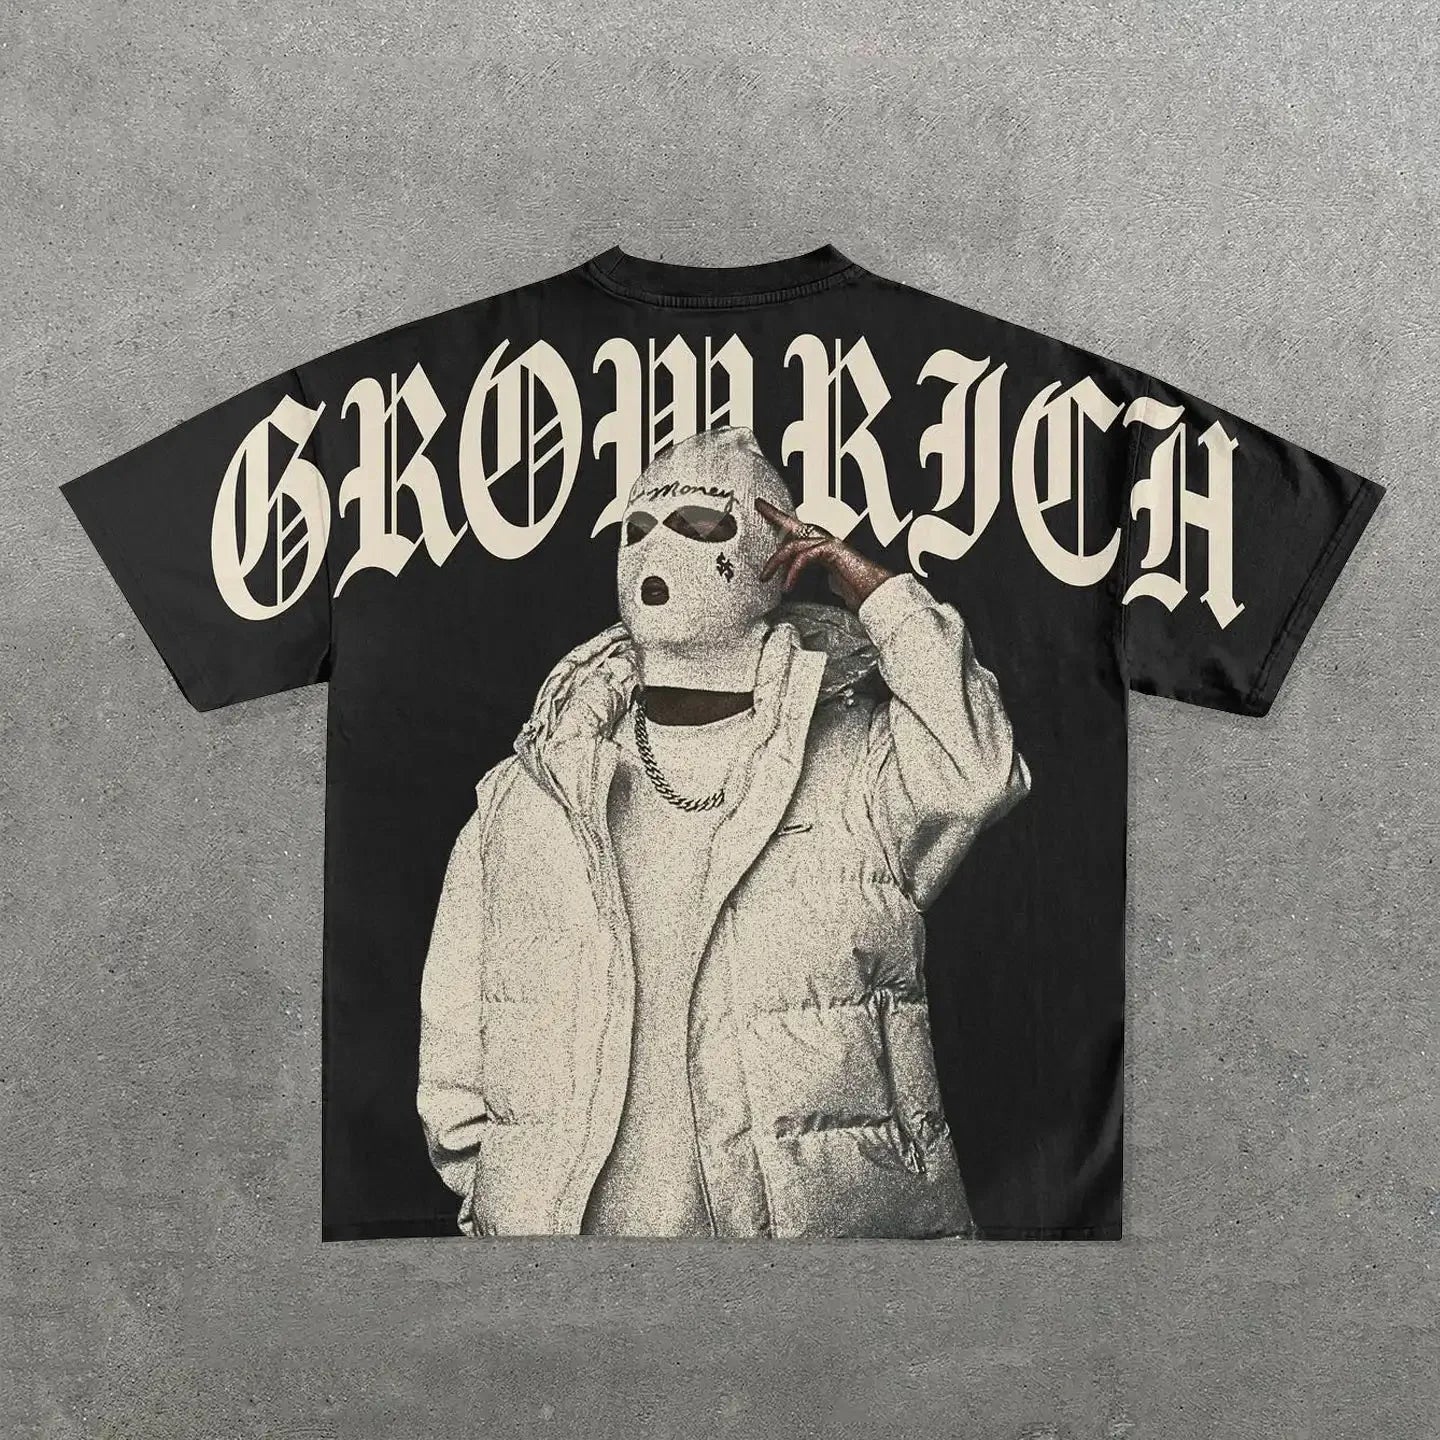 A black Punk Hip Hop Graphic T Shirts Mens Vintage Y2k Top Goth Oversized T Shirt Fashion Loose Casual Short Sleeve Streetwear featuring a graphic of a masked figure in a white puffer jacket, wearing a chain, with the words "GROW RICH" in large Gothic-style font above from Maramalive™.